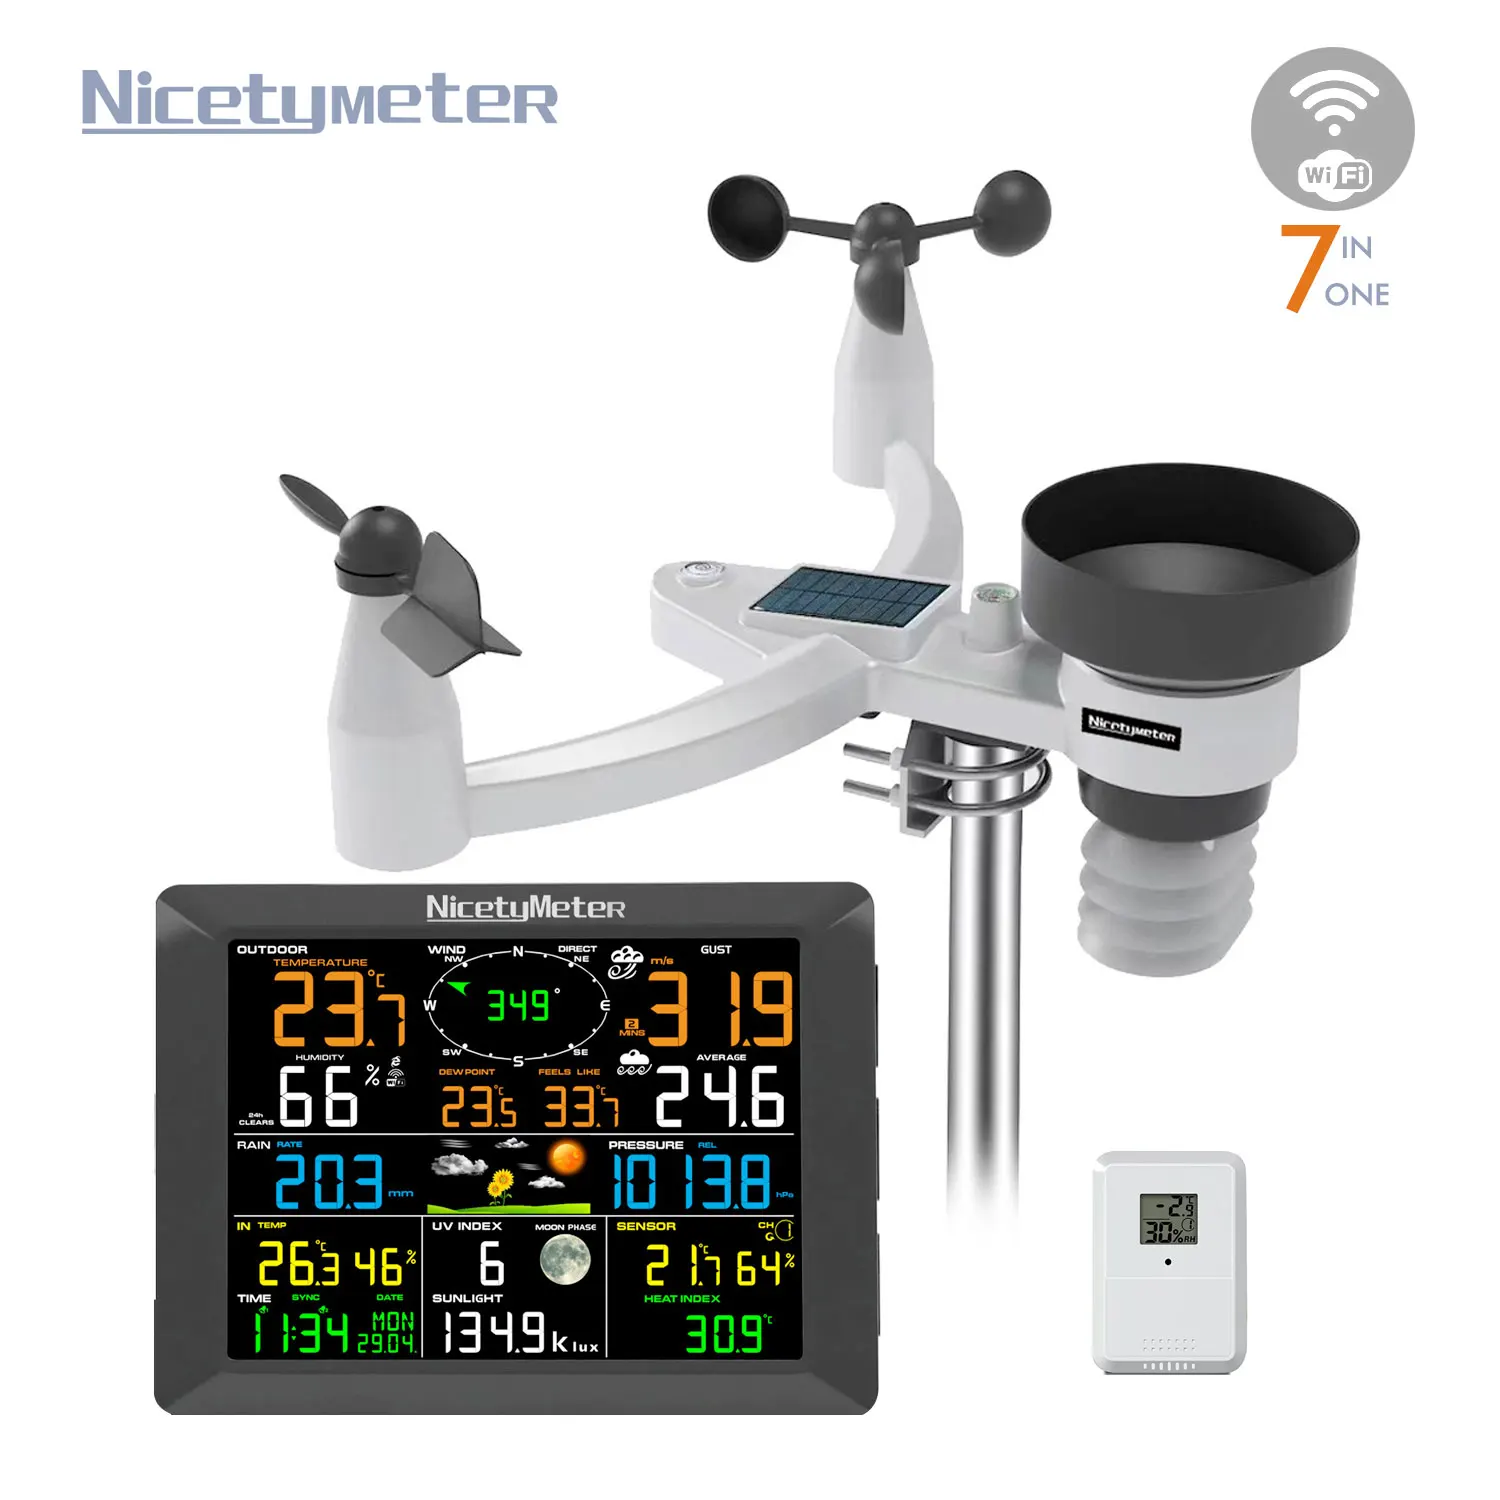 https://ae01.alicdn.com/kf/S8a7be2a53e984516b266dff9ae18100fw/NicetyMeter-7-in-1-Wi-Fi-Weather-Station-Solar-Indoor-Outdoor-Remote-Monitoring-System-Temperature-Humidity.jpg